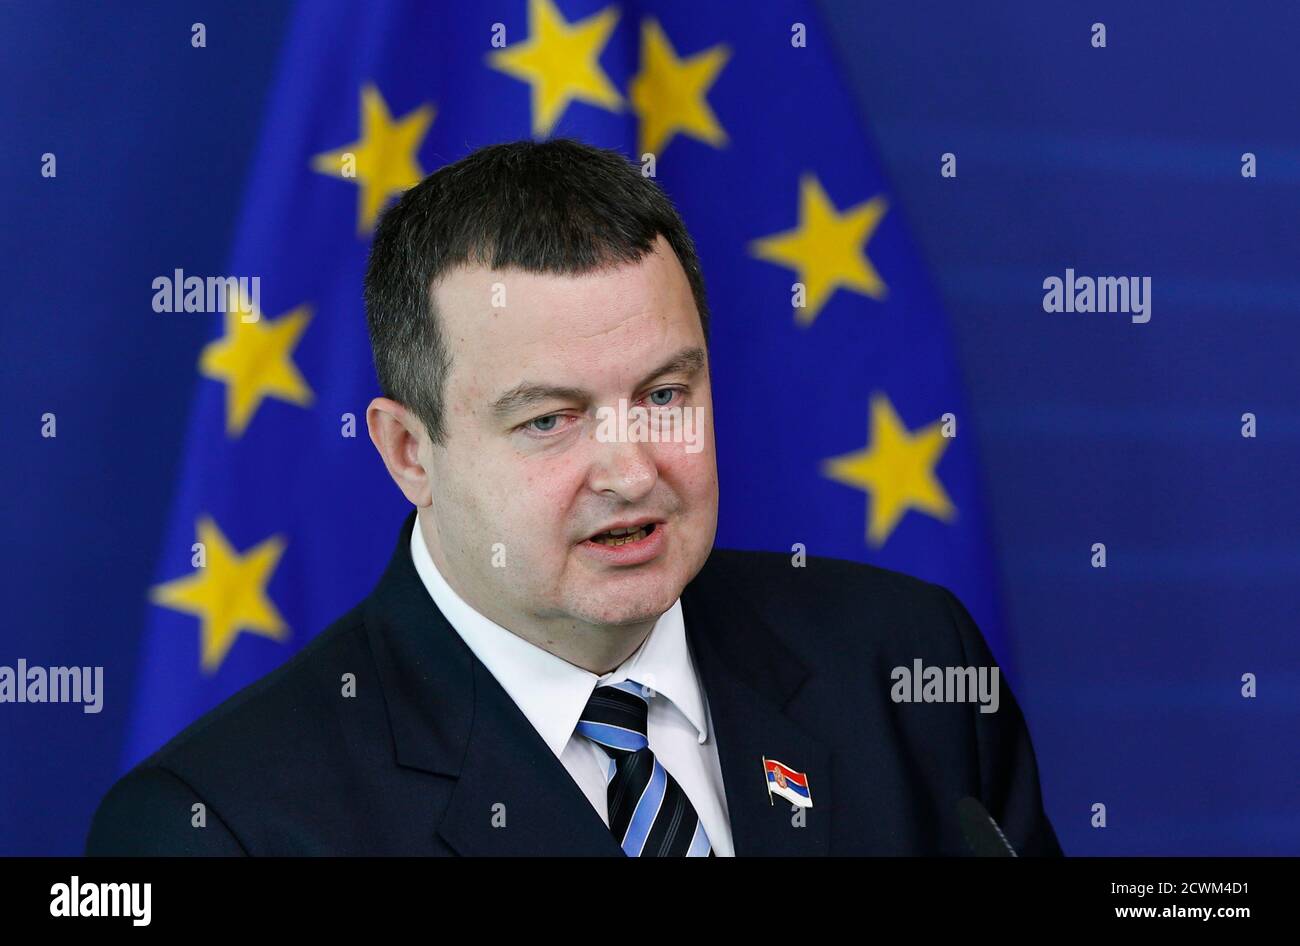 Serbian Prime Minister Ivica Dacic addresses a news conference after meeting European Commision President Jose Manuel Barroso (unseen) at the EU Commission headquarters in Brussels June 26, 2013. Serbia could start negotiations on joining the European Union by January next year, EU ministers agreed on Tuesday, rewarding Belgrade for improving relations with its ex-province Kosovo.    REUTERS/Francois Lenoir (BELGIUM - Tags: POLITICS BUSINESS) Stock Photo